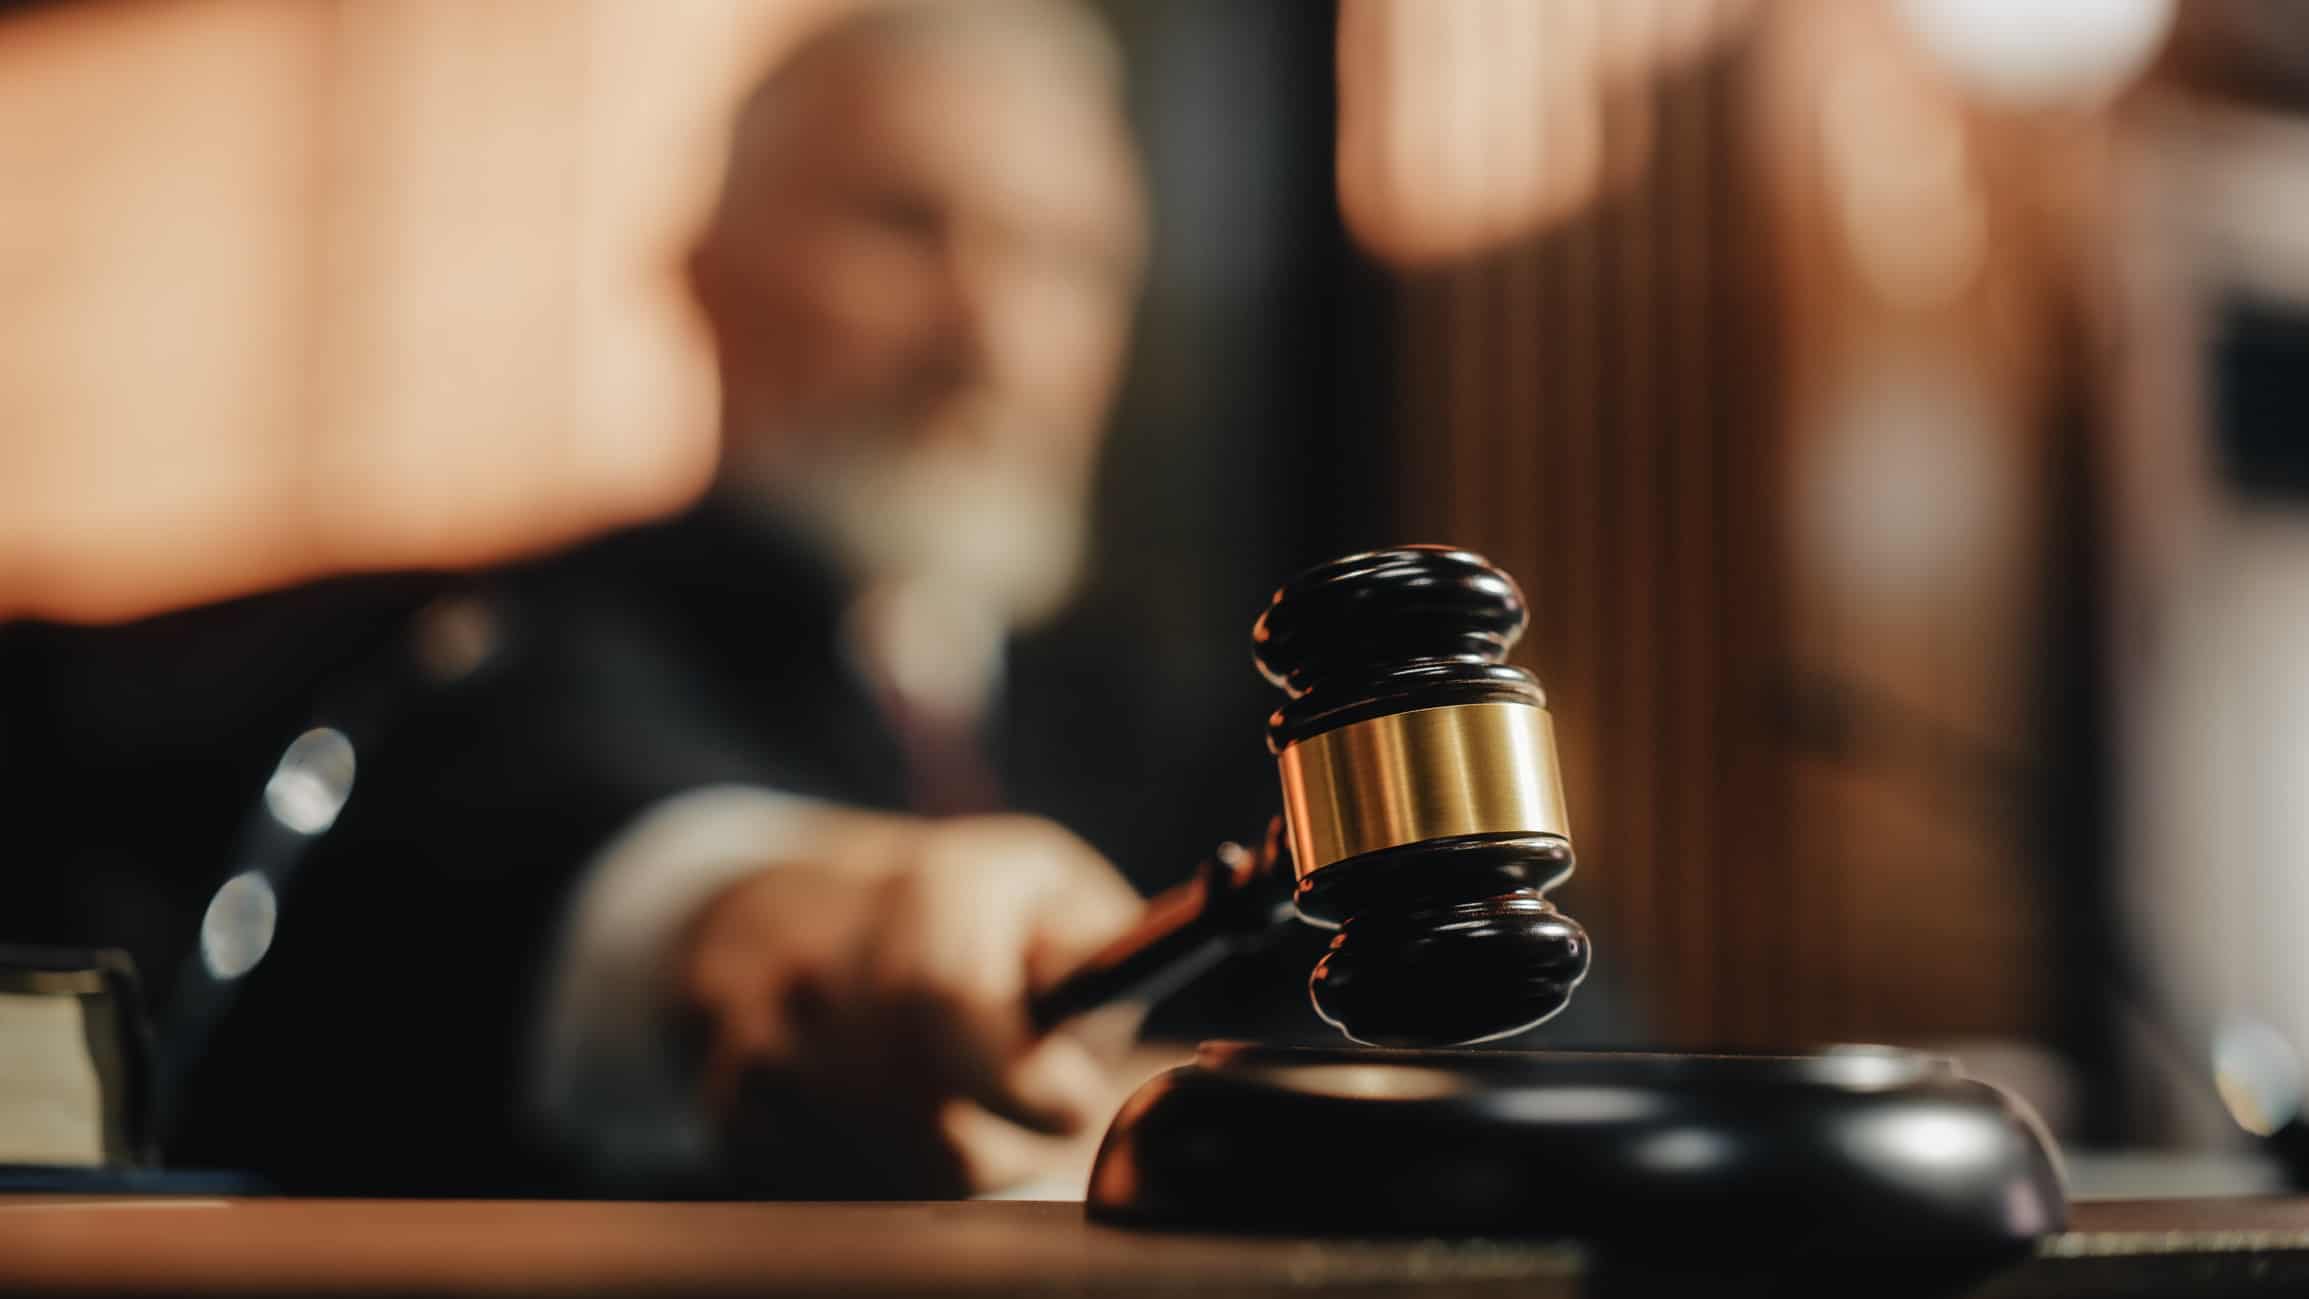 a judge sitting in a blurred background reaches forward to strike his gavel on the strikeplate on his judge's bench.